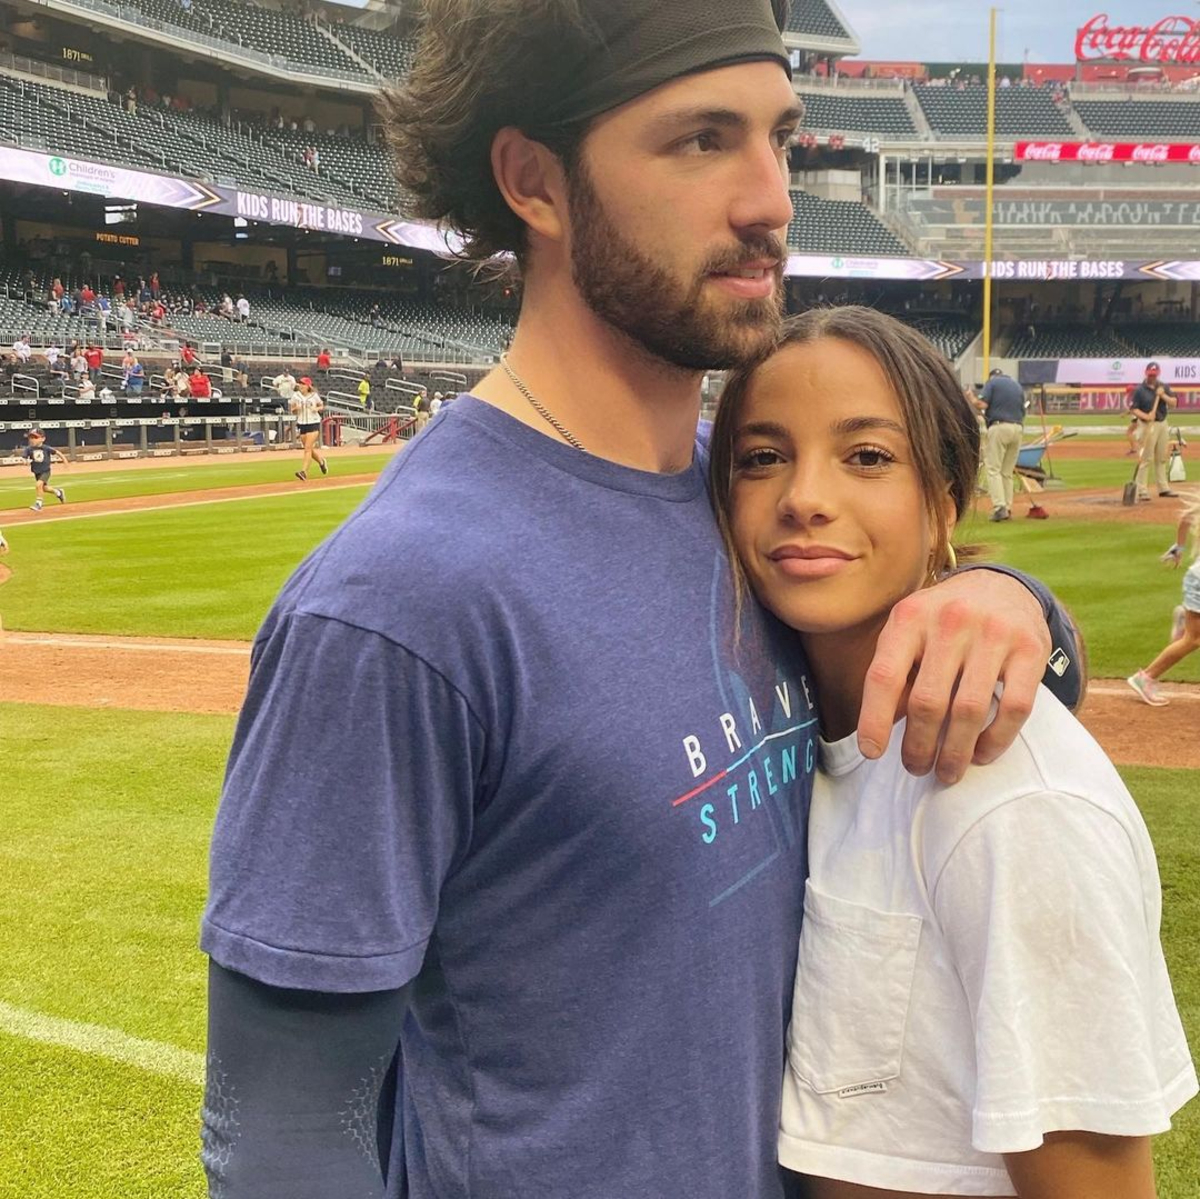 Meet Dansby and Mallory Swanson, US sporting power couple labeled 'the  cutest' by baseball and football fans